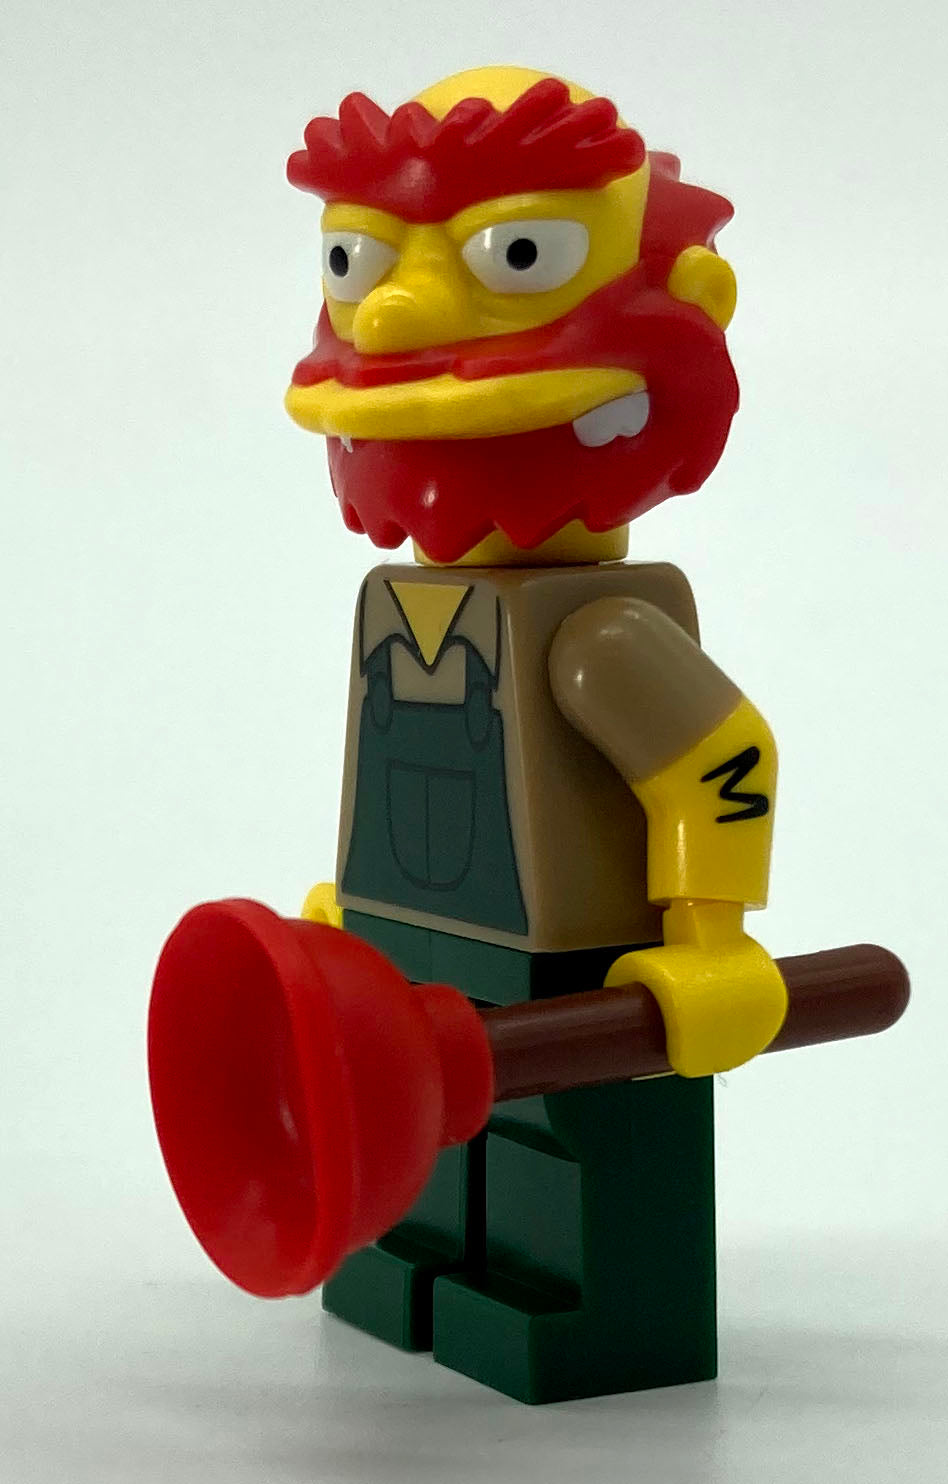 The Simpsons Series 2 - Groundskeeper Willie